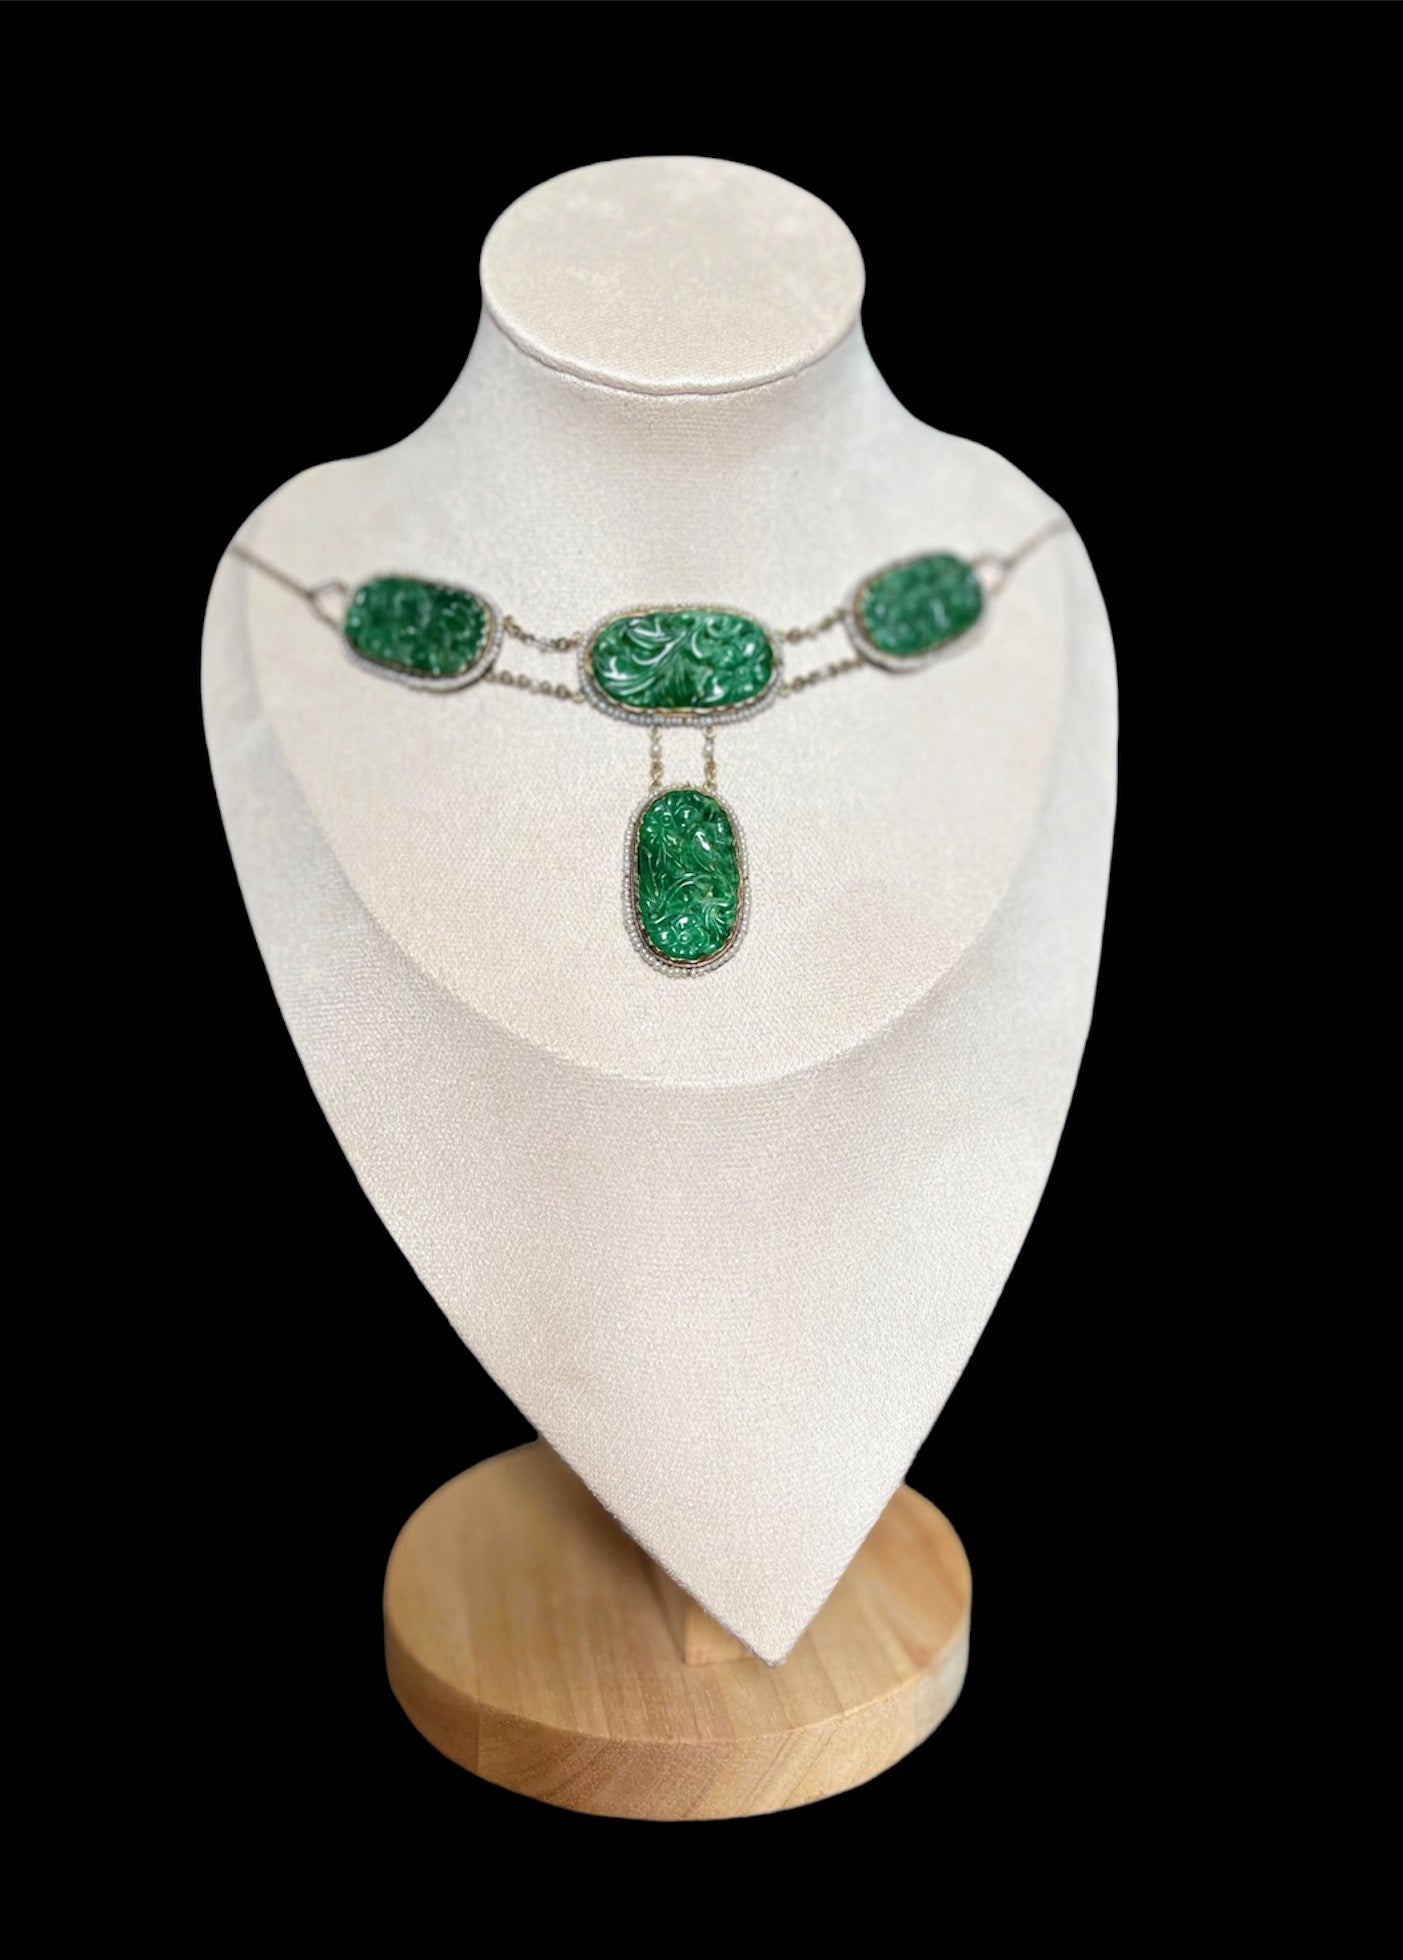 A jade and pearl necklace in 14kt gold setting